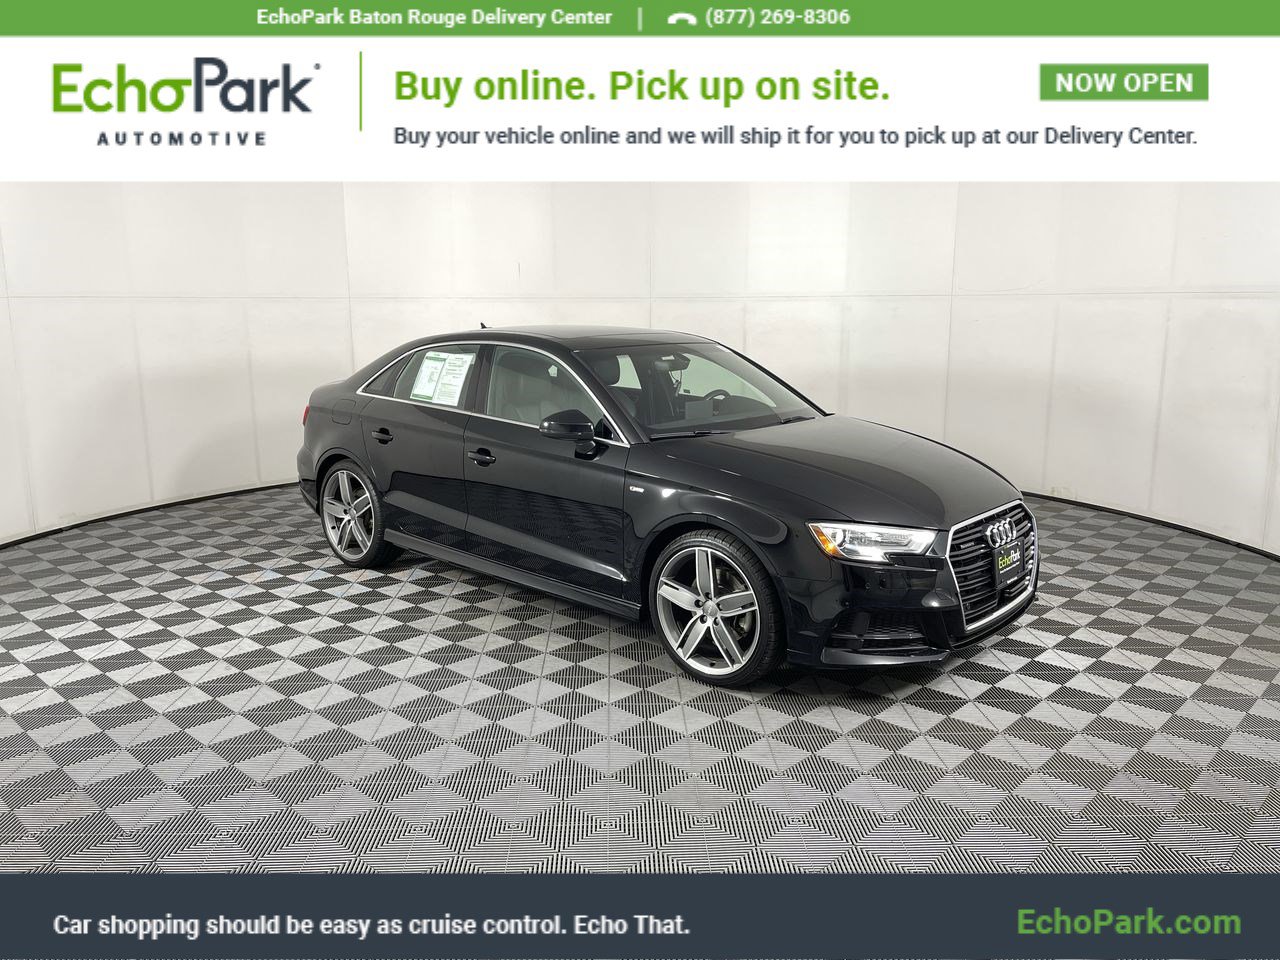 Cursus kleding Maak een bed Used Audi A3 for Sale Right Now in Denham Springs, LA - Autotrader